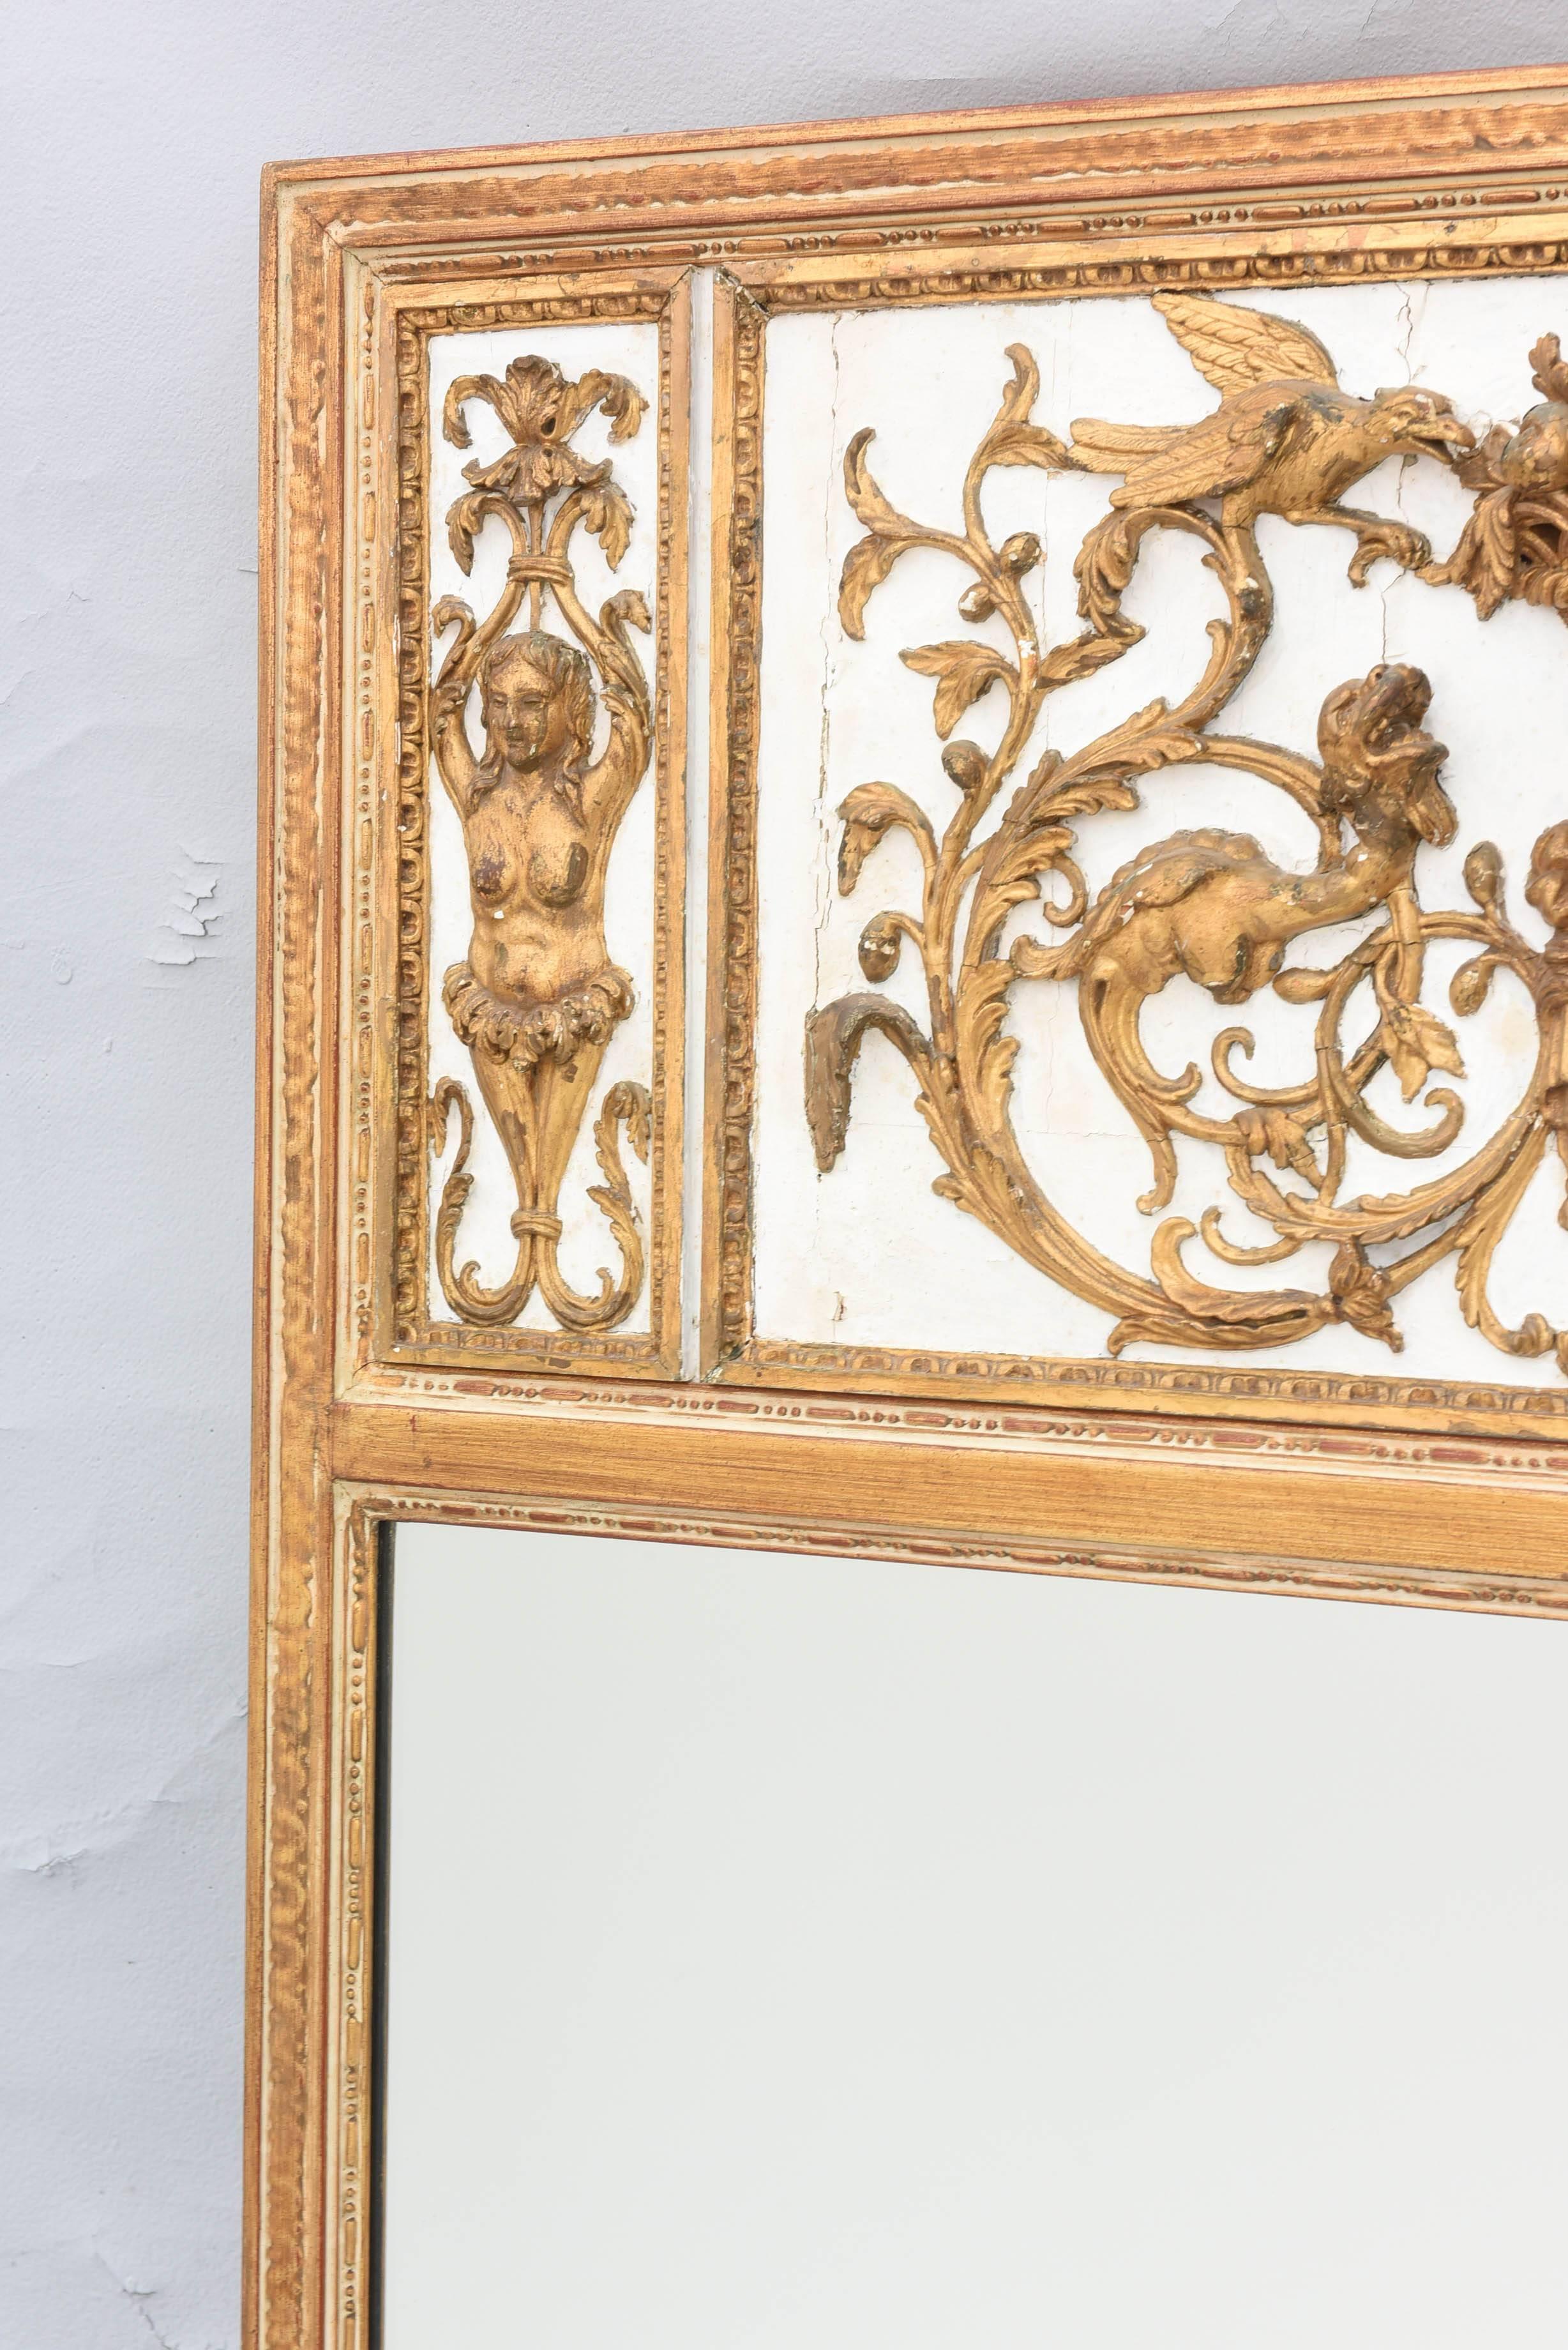 Trumeau mirror, its rectangular frame carved with gadrooning and beading, surmounted by an 18th Century panel, decorated with elaborate, gilded, classical carvings; center panel carved with mask under a fruit-filled basket, flanked by birds, animals